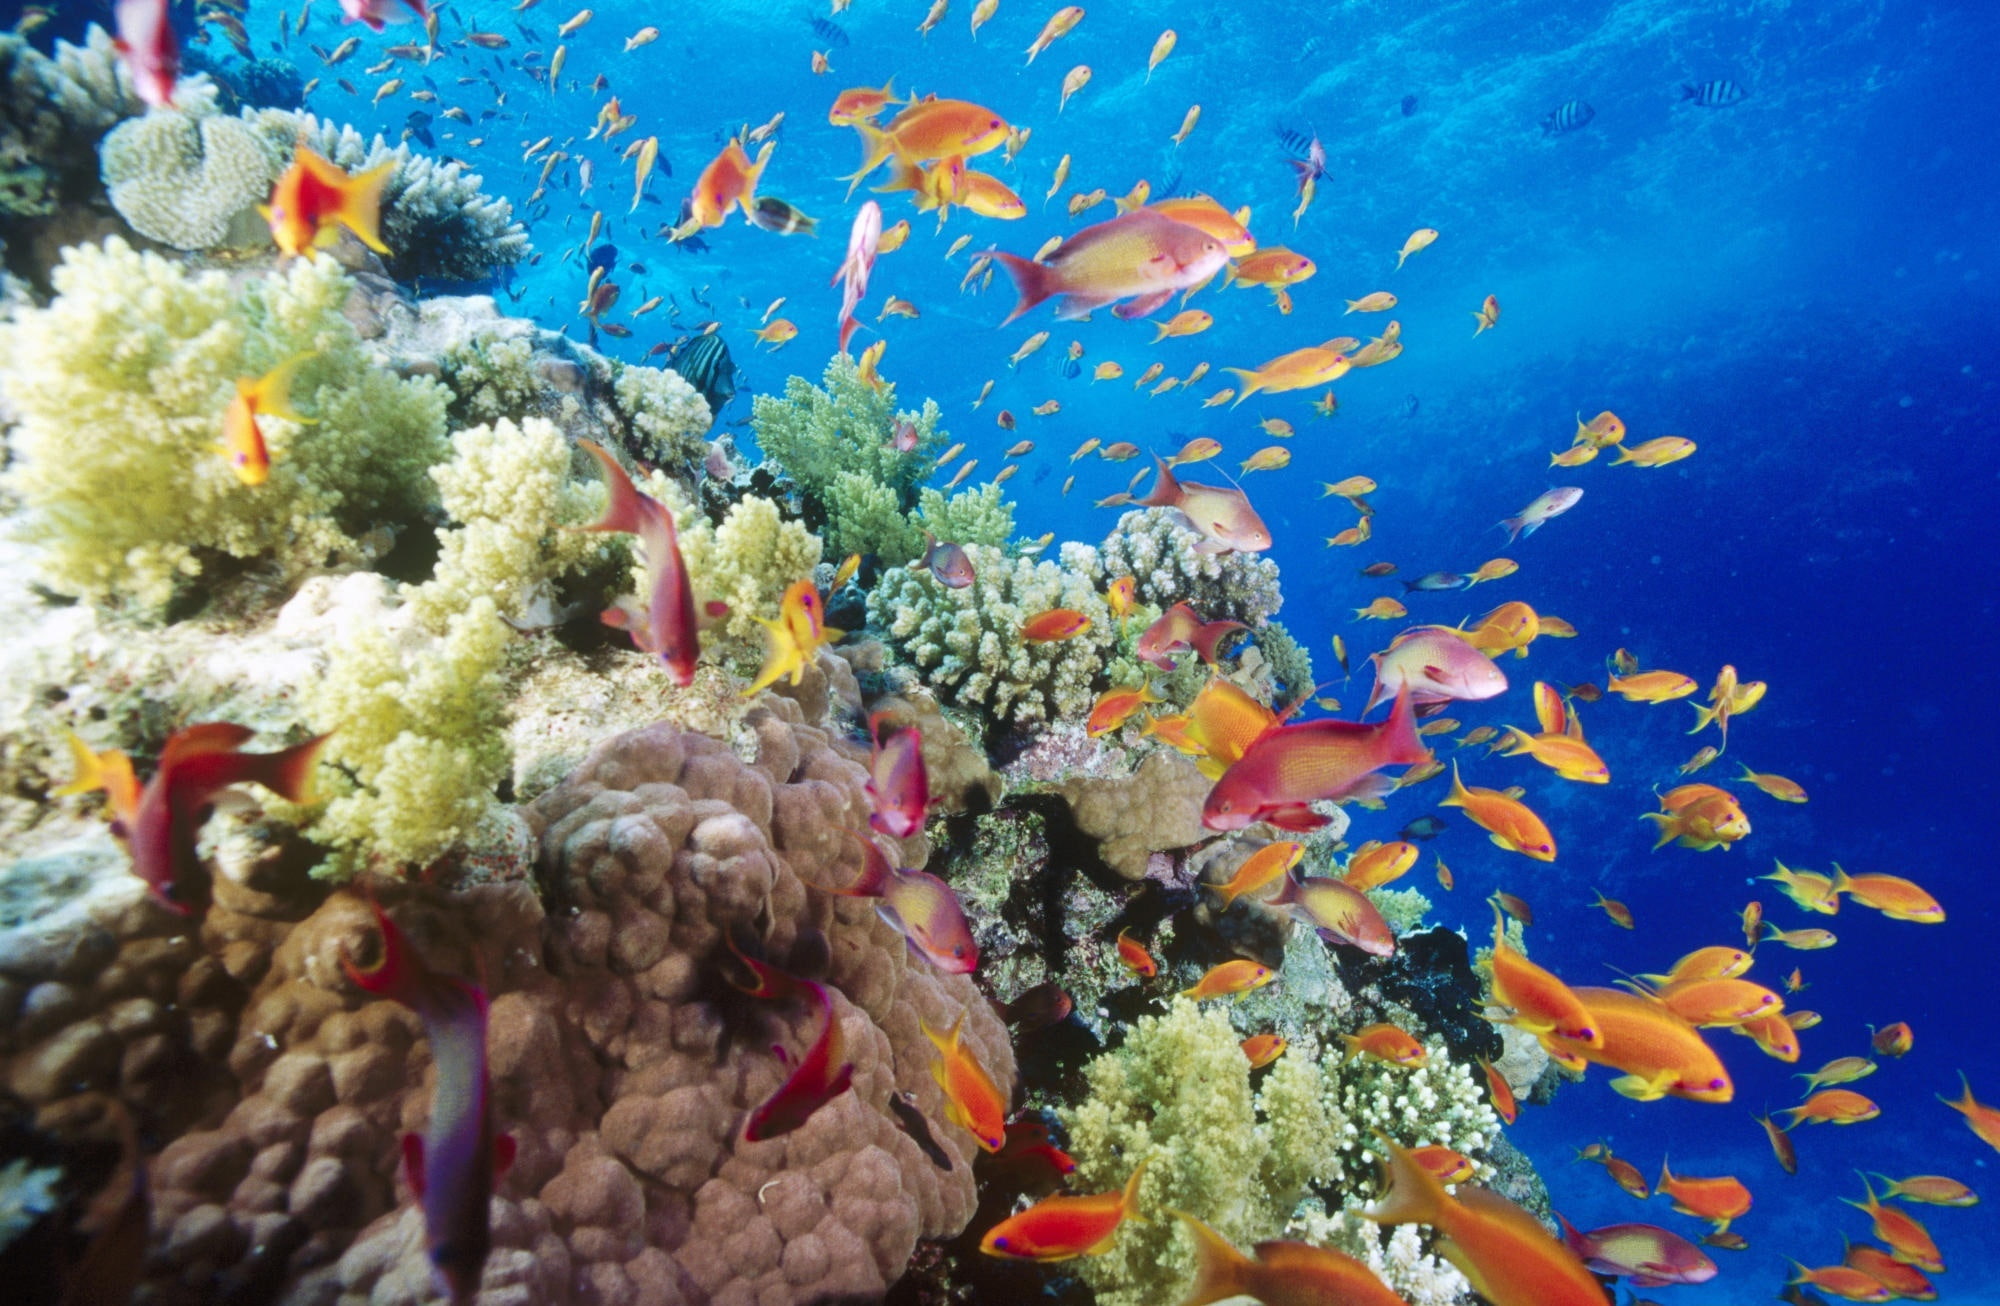 Coral Reef Southern Red Sea Near Safaga Egypt, coral reefs and fish